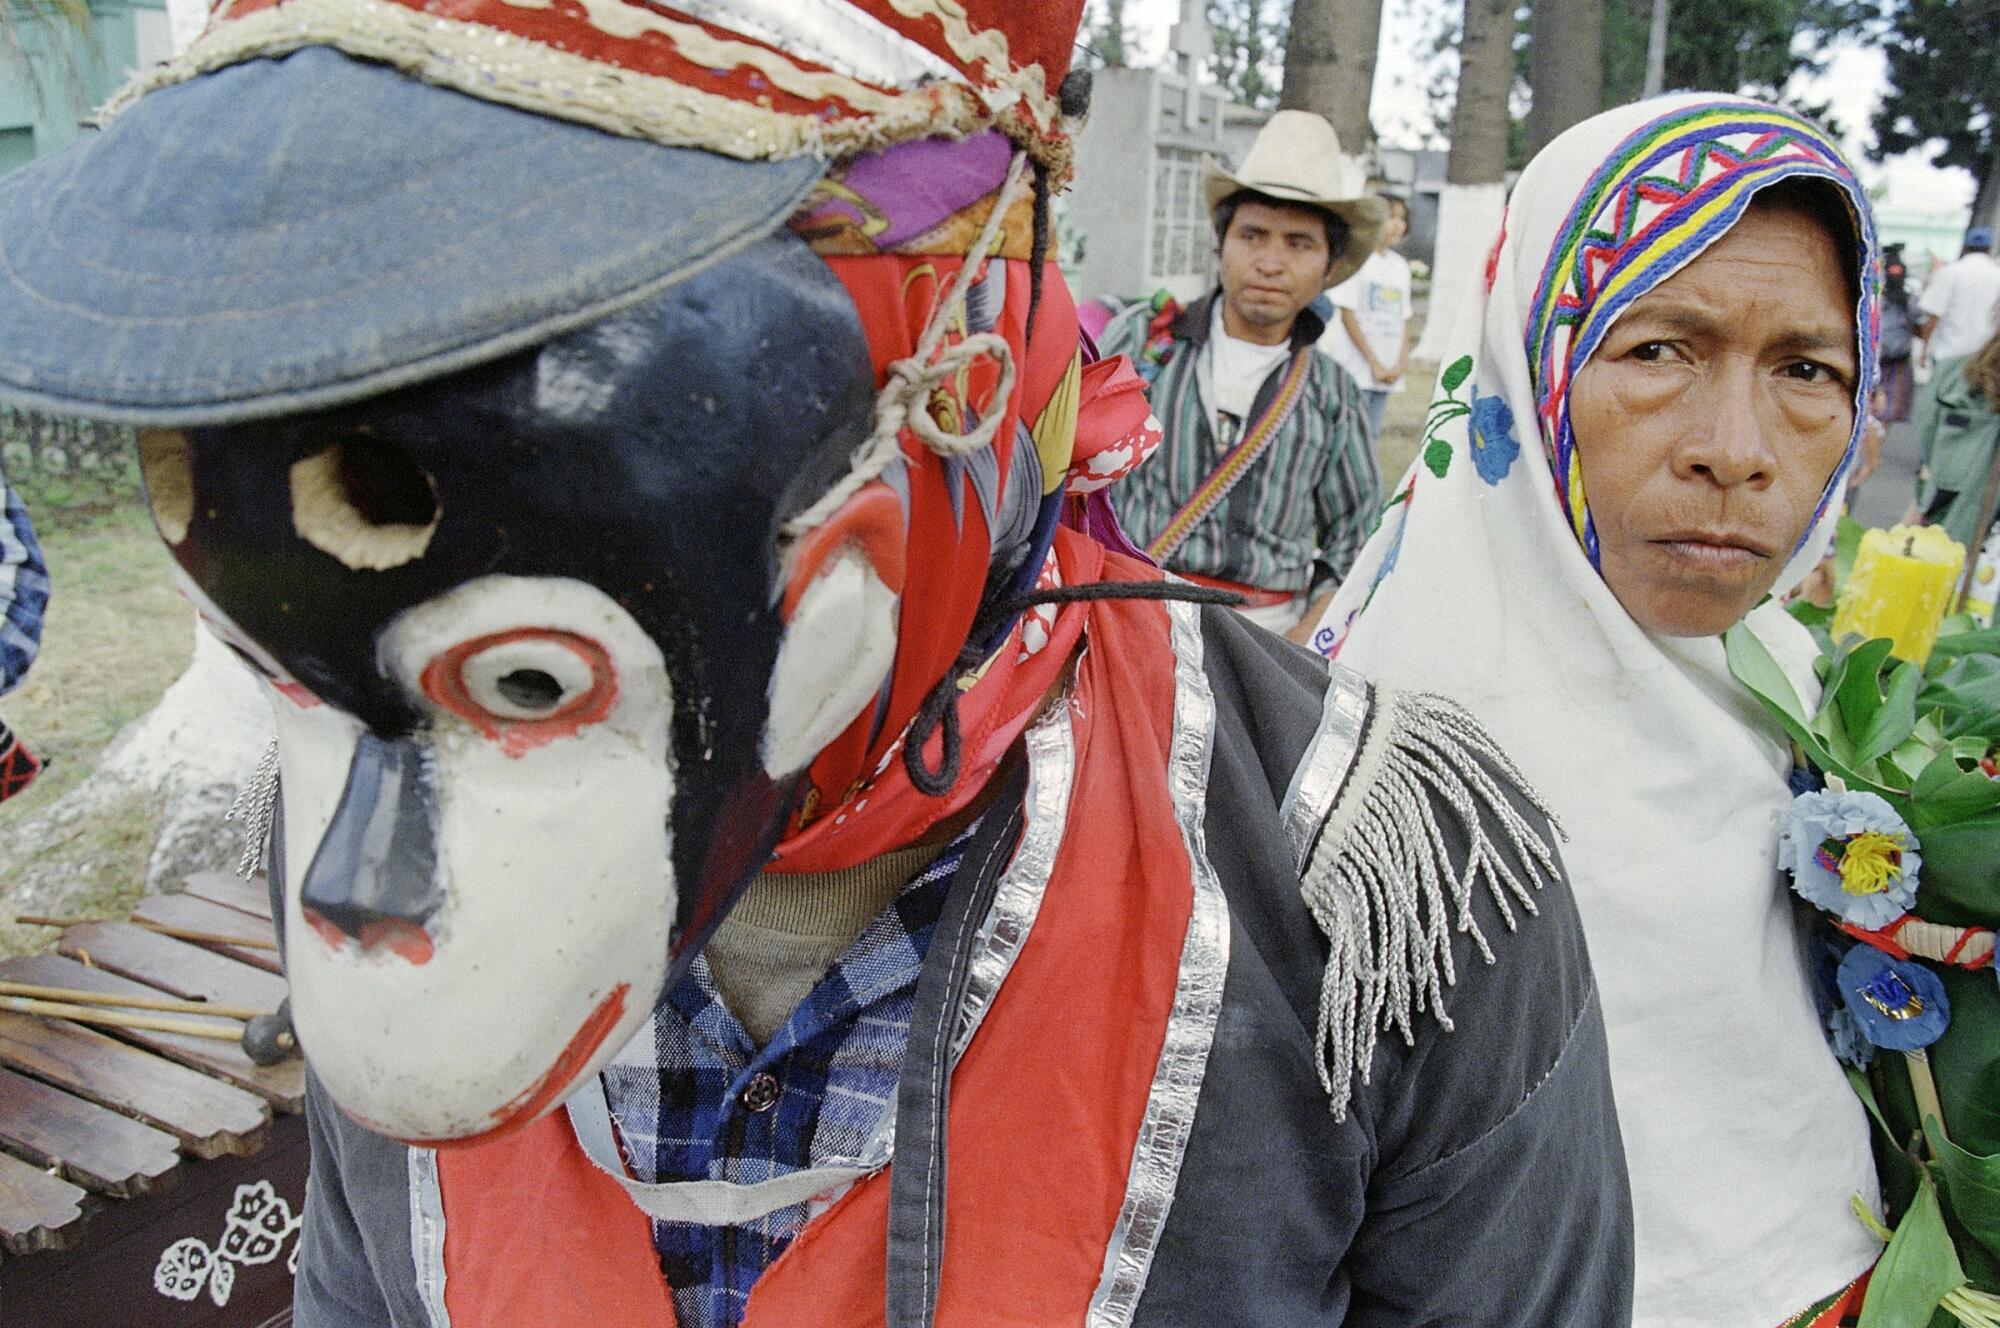 A woman wearing a headscarf and a person wearing a monkey mask